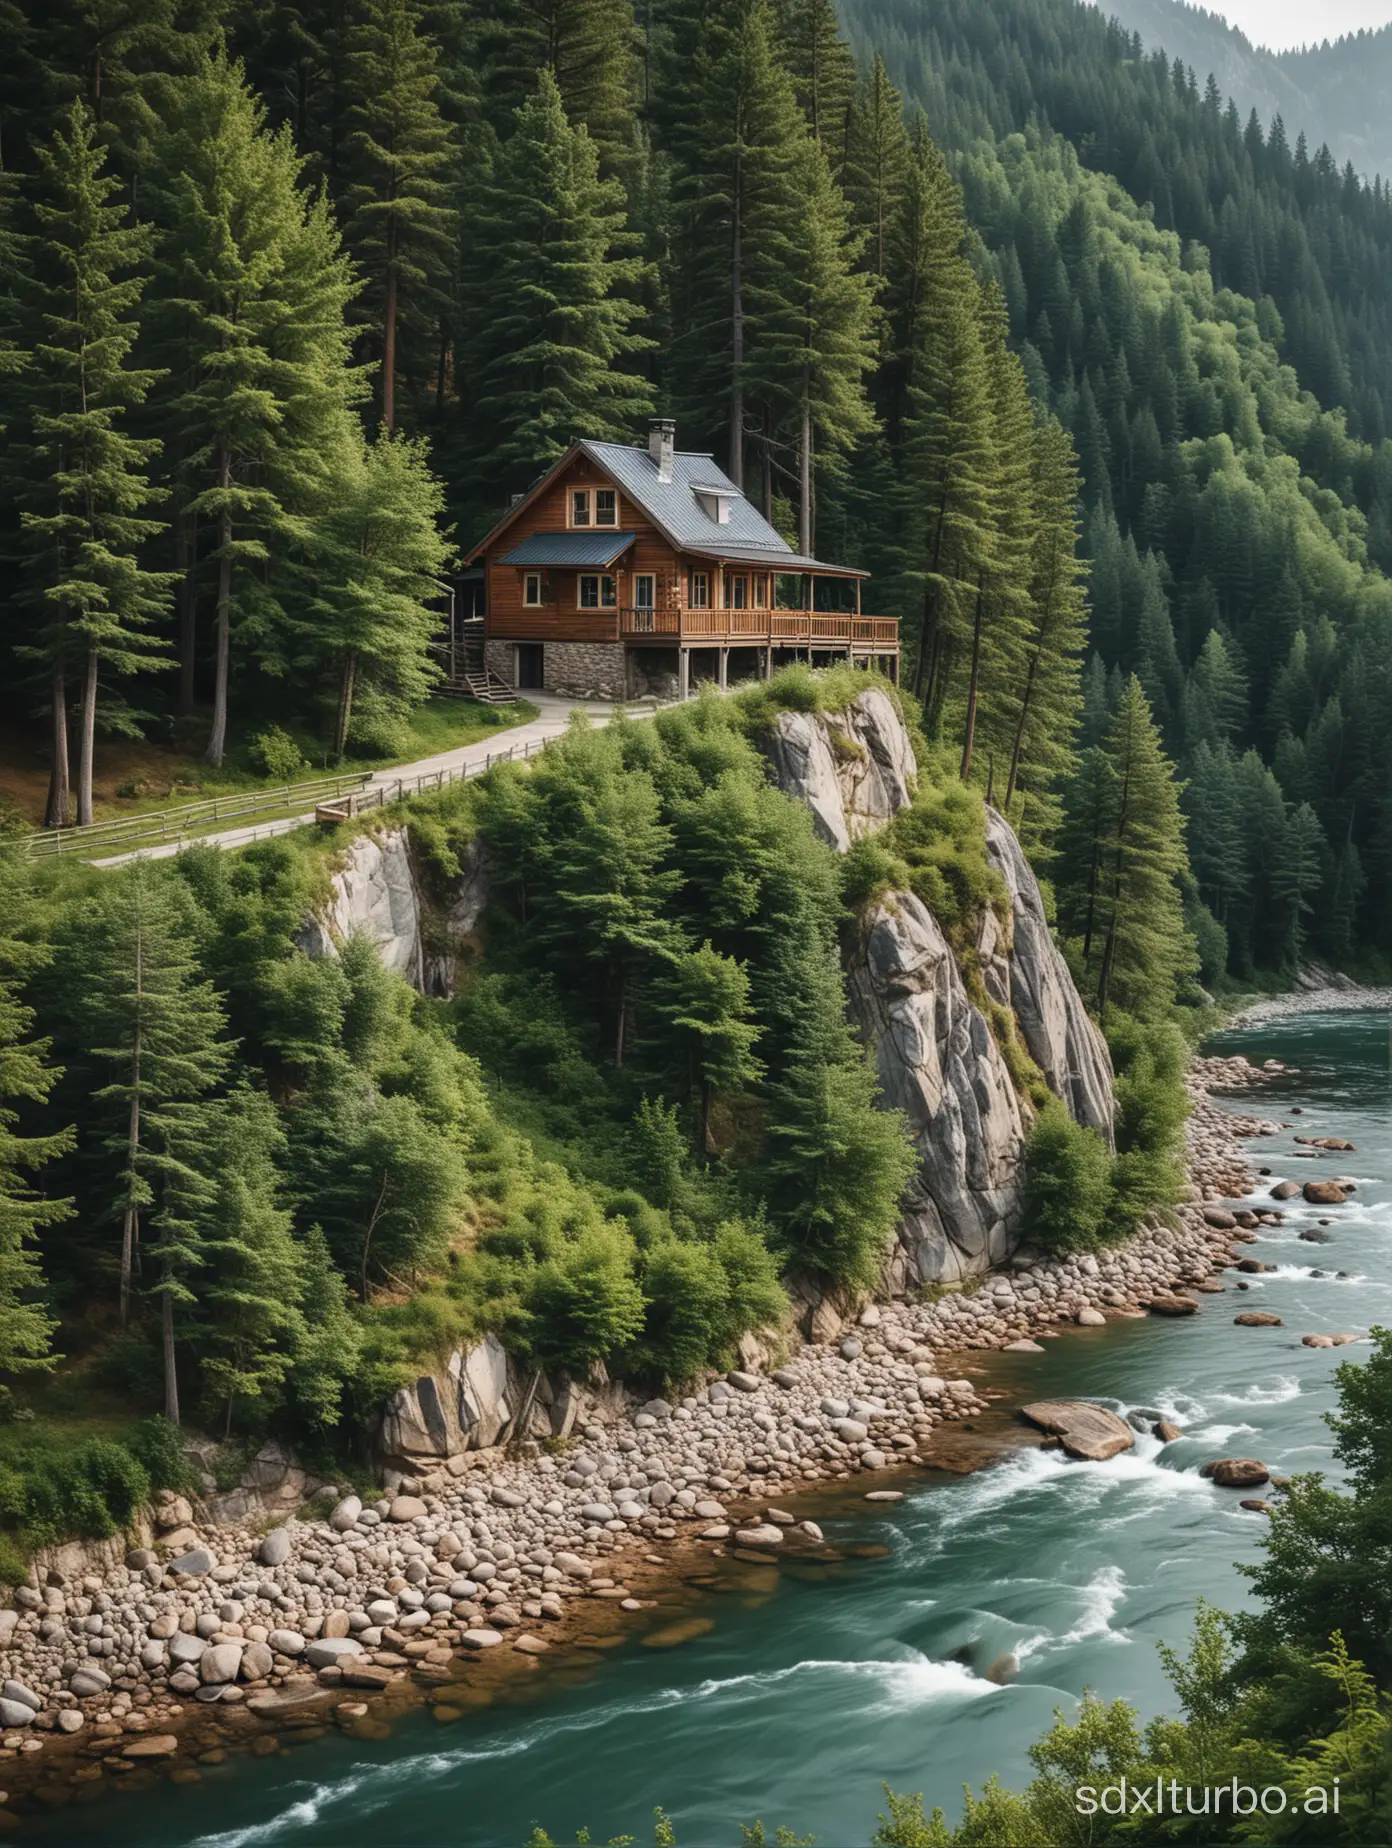 Small house on a mountain with a forest behind the house and a river passing in front